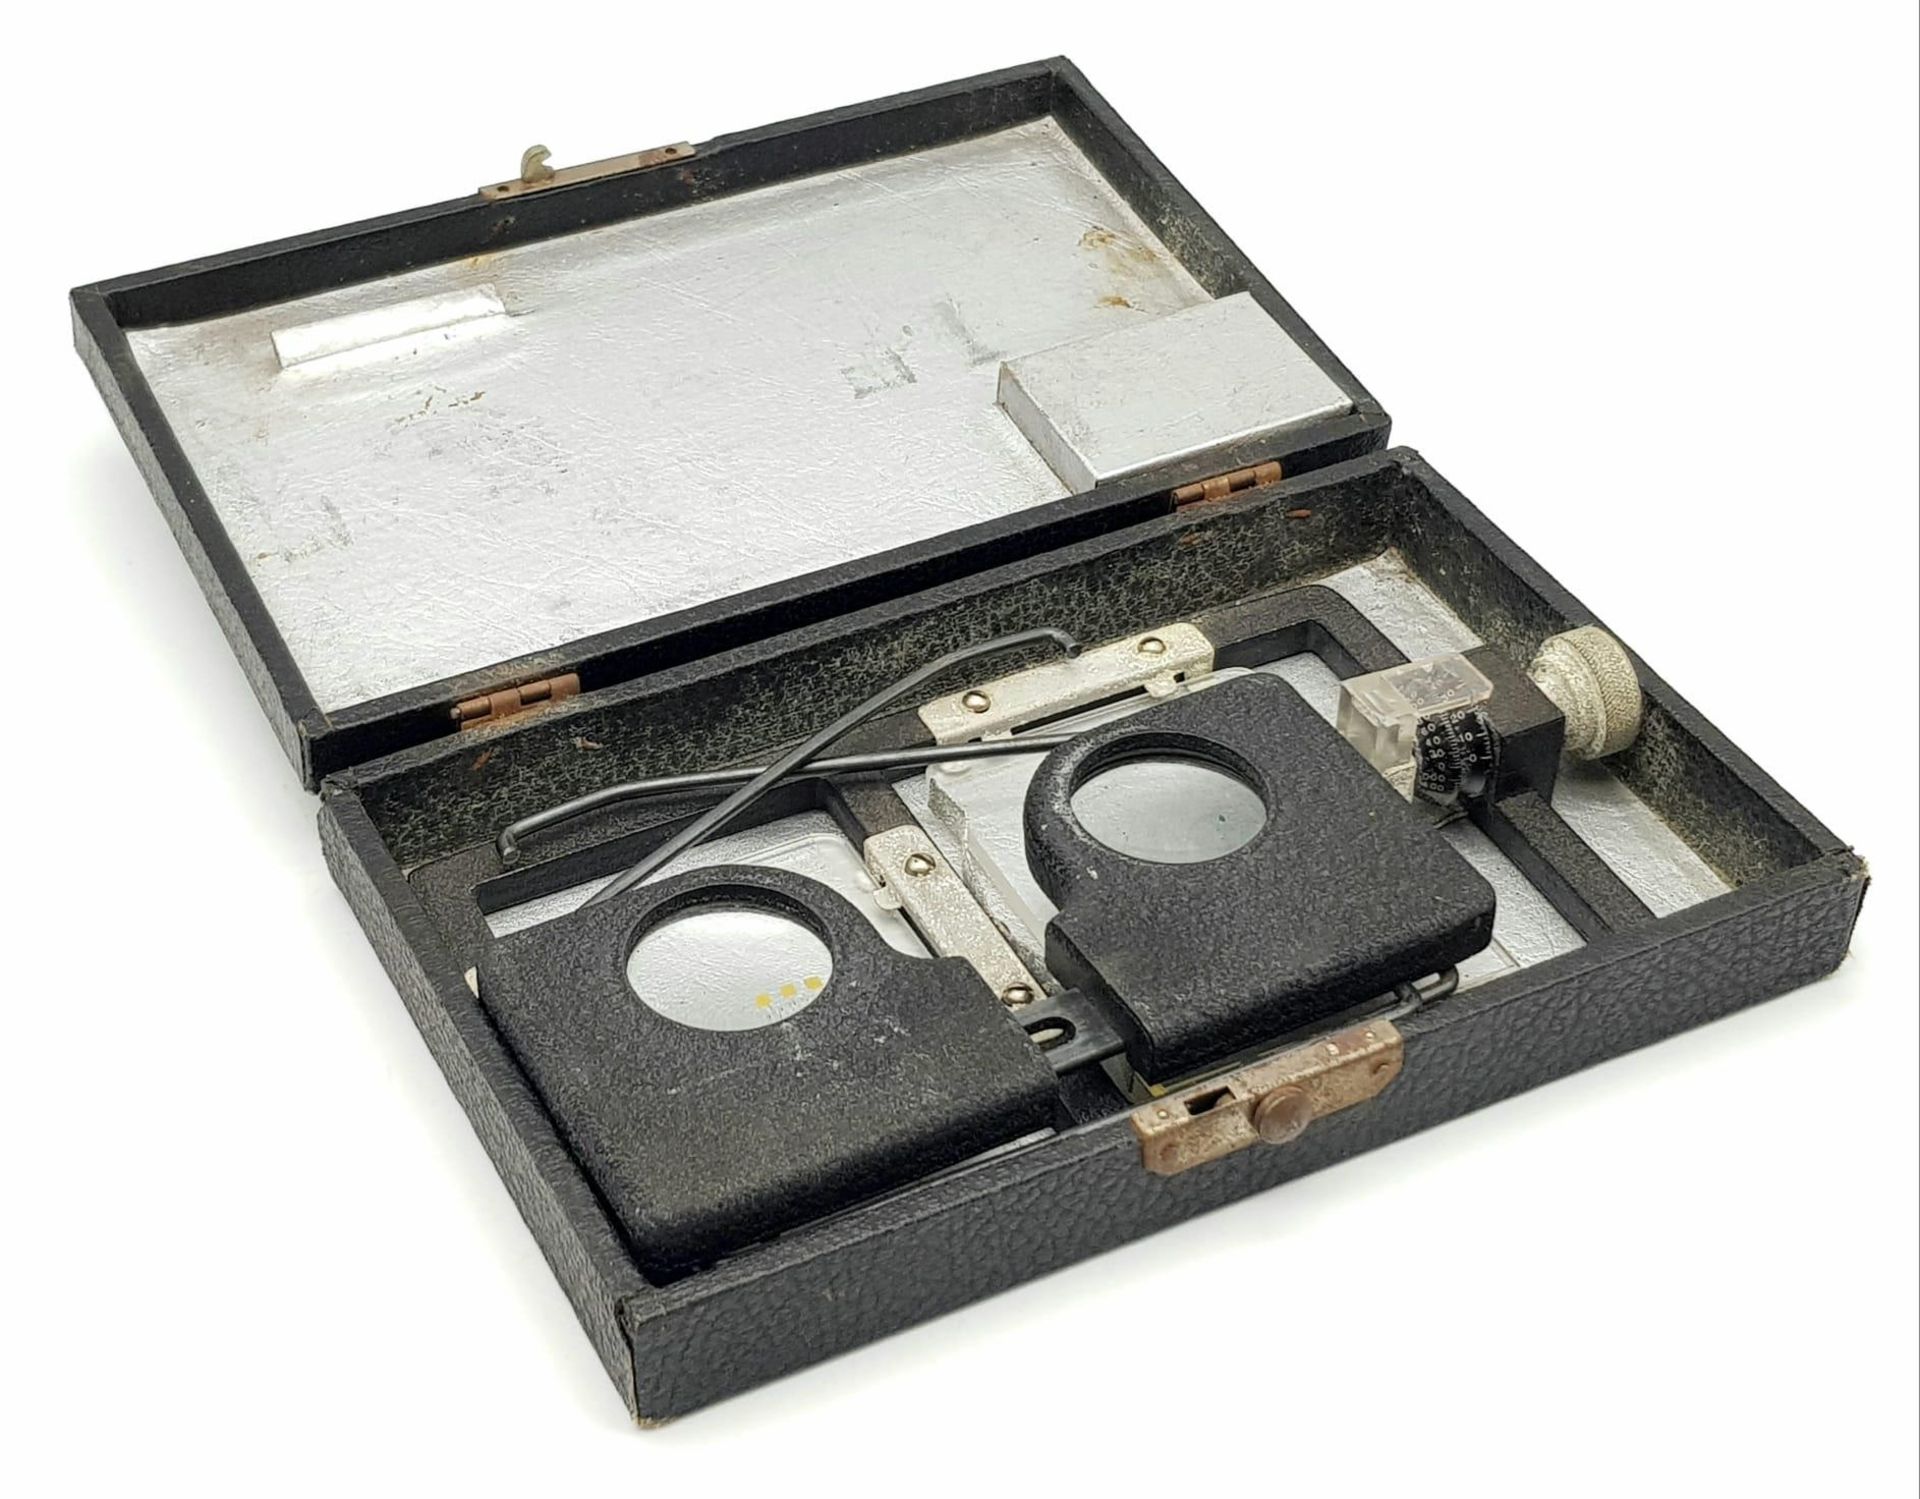 A Vintage Austin Photo Interpretometer - Used for measuring distances in stereoscopic photographs. - Image 5 of 7